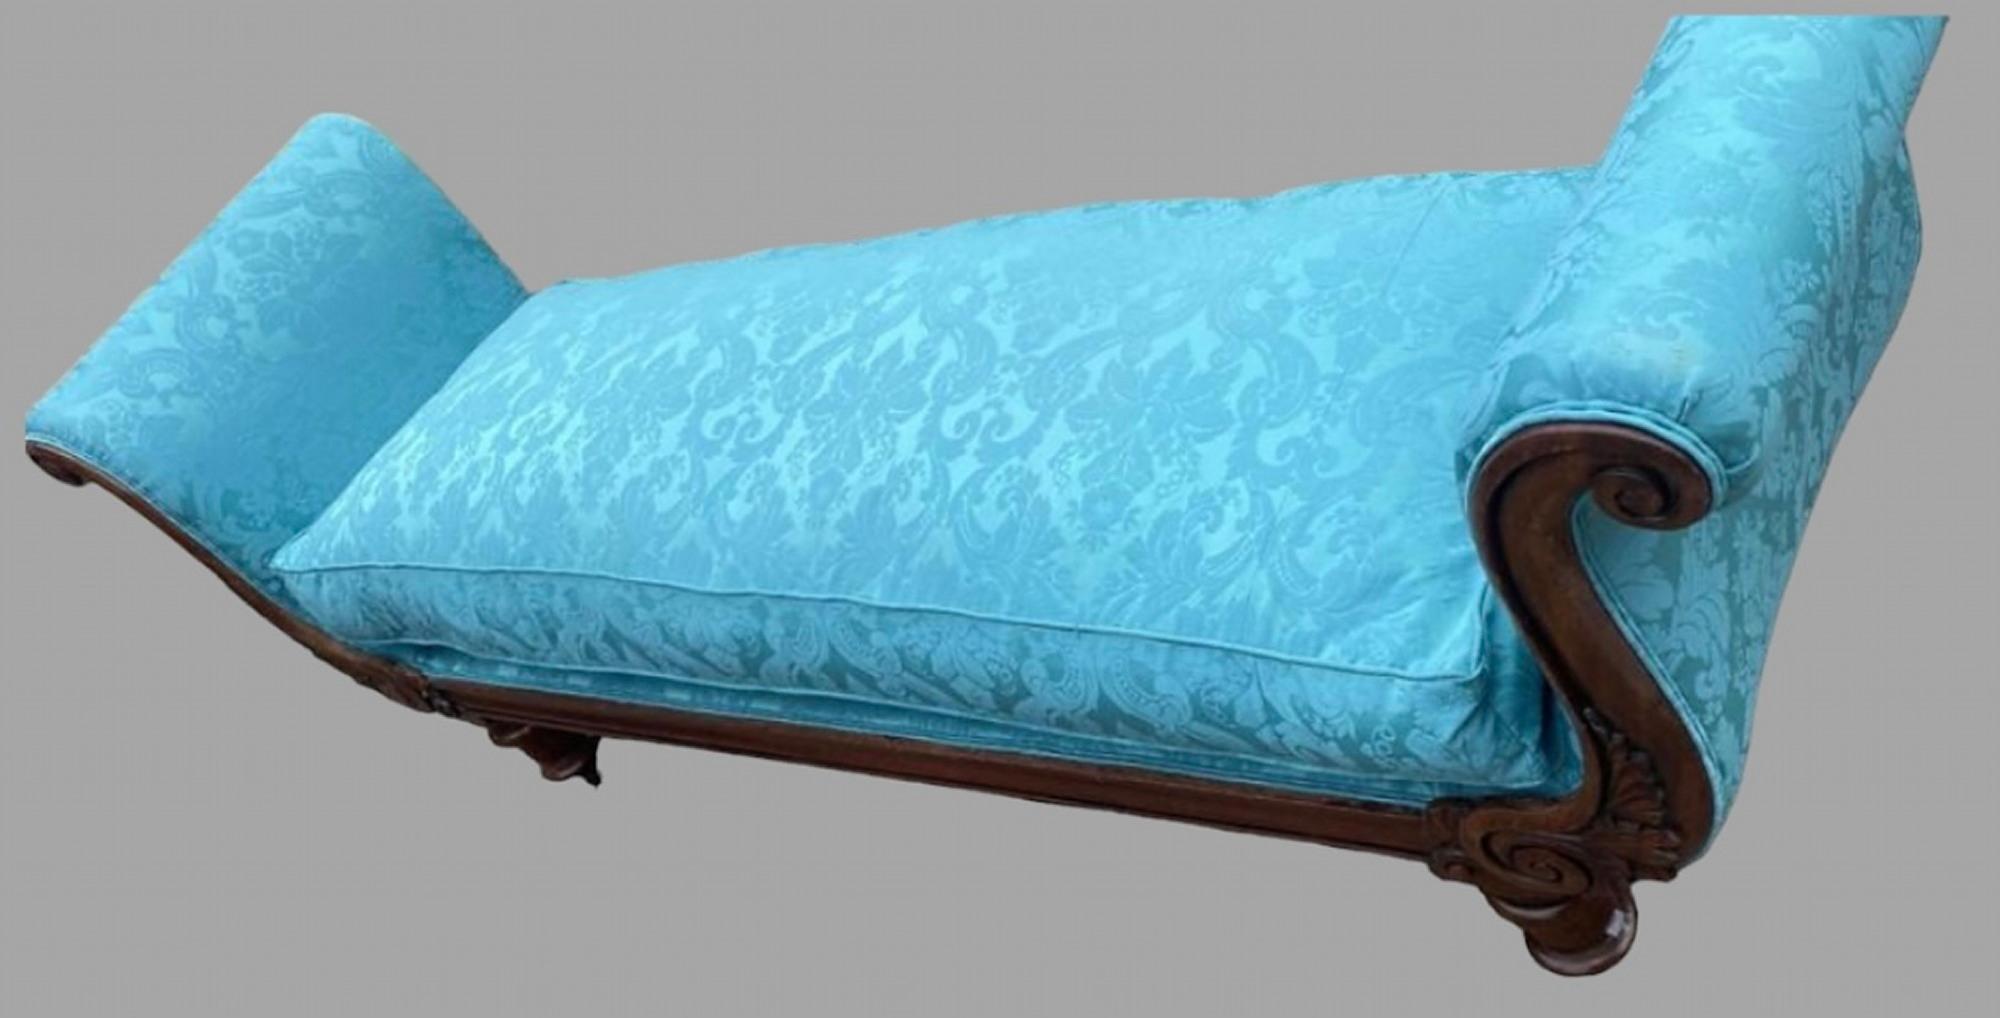 A 19th Century French Lit Bateau with twin scrolled ends, on turned legs and castors and professionally reupholstered in a lovely blue silk damask. Seat Height 55cm

Lit Bateau - French Bed usually in shape of a boat.